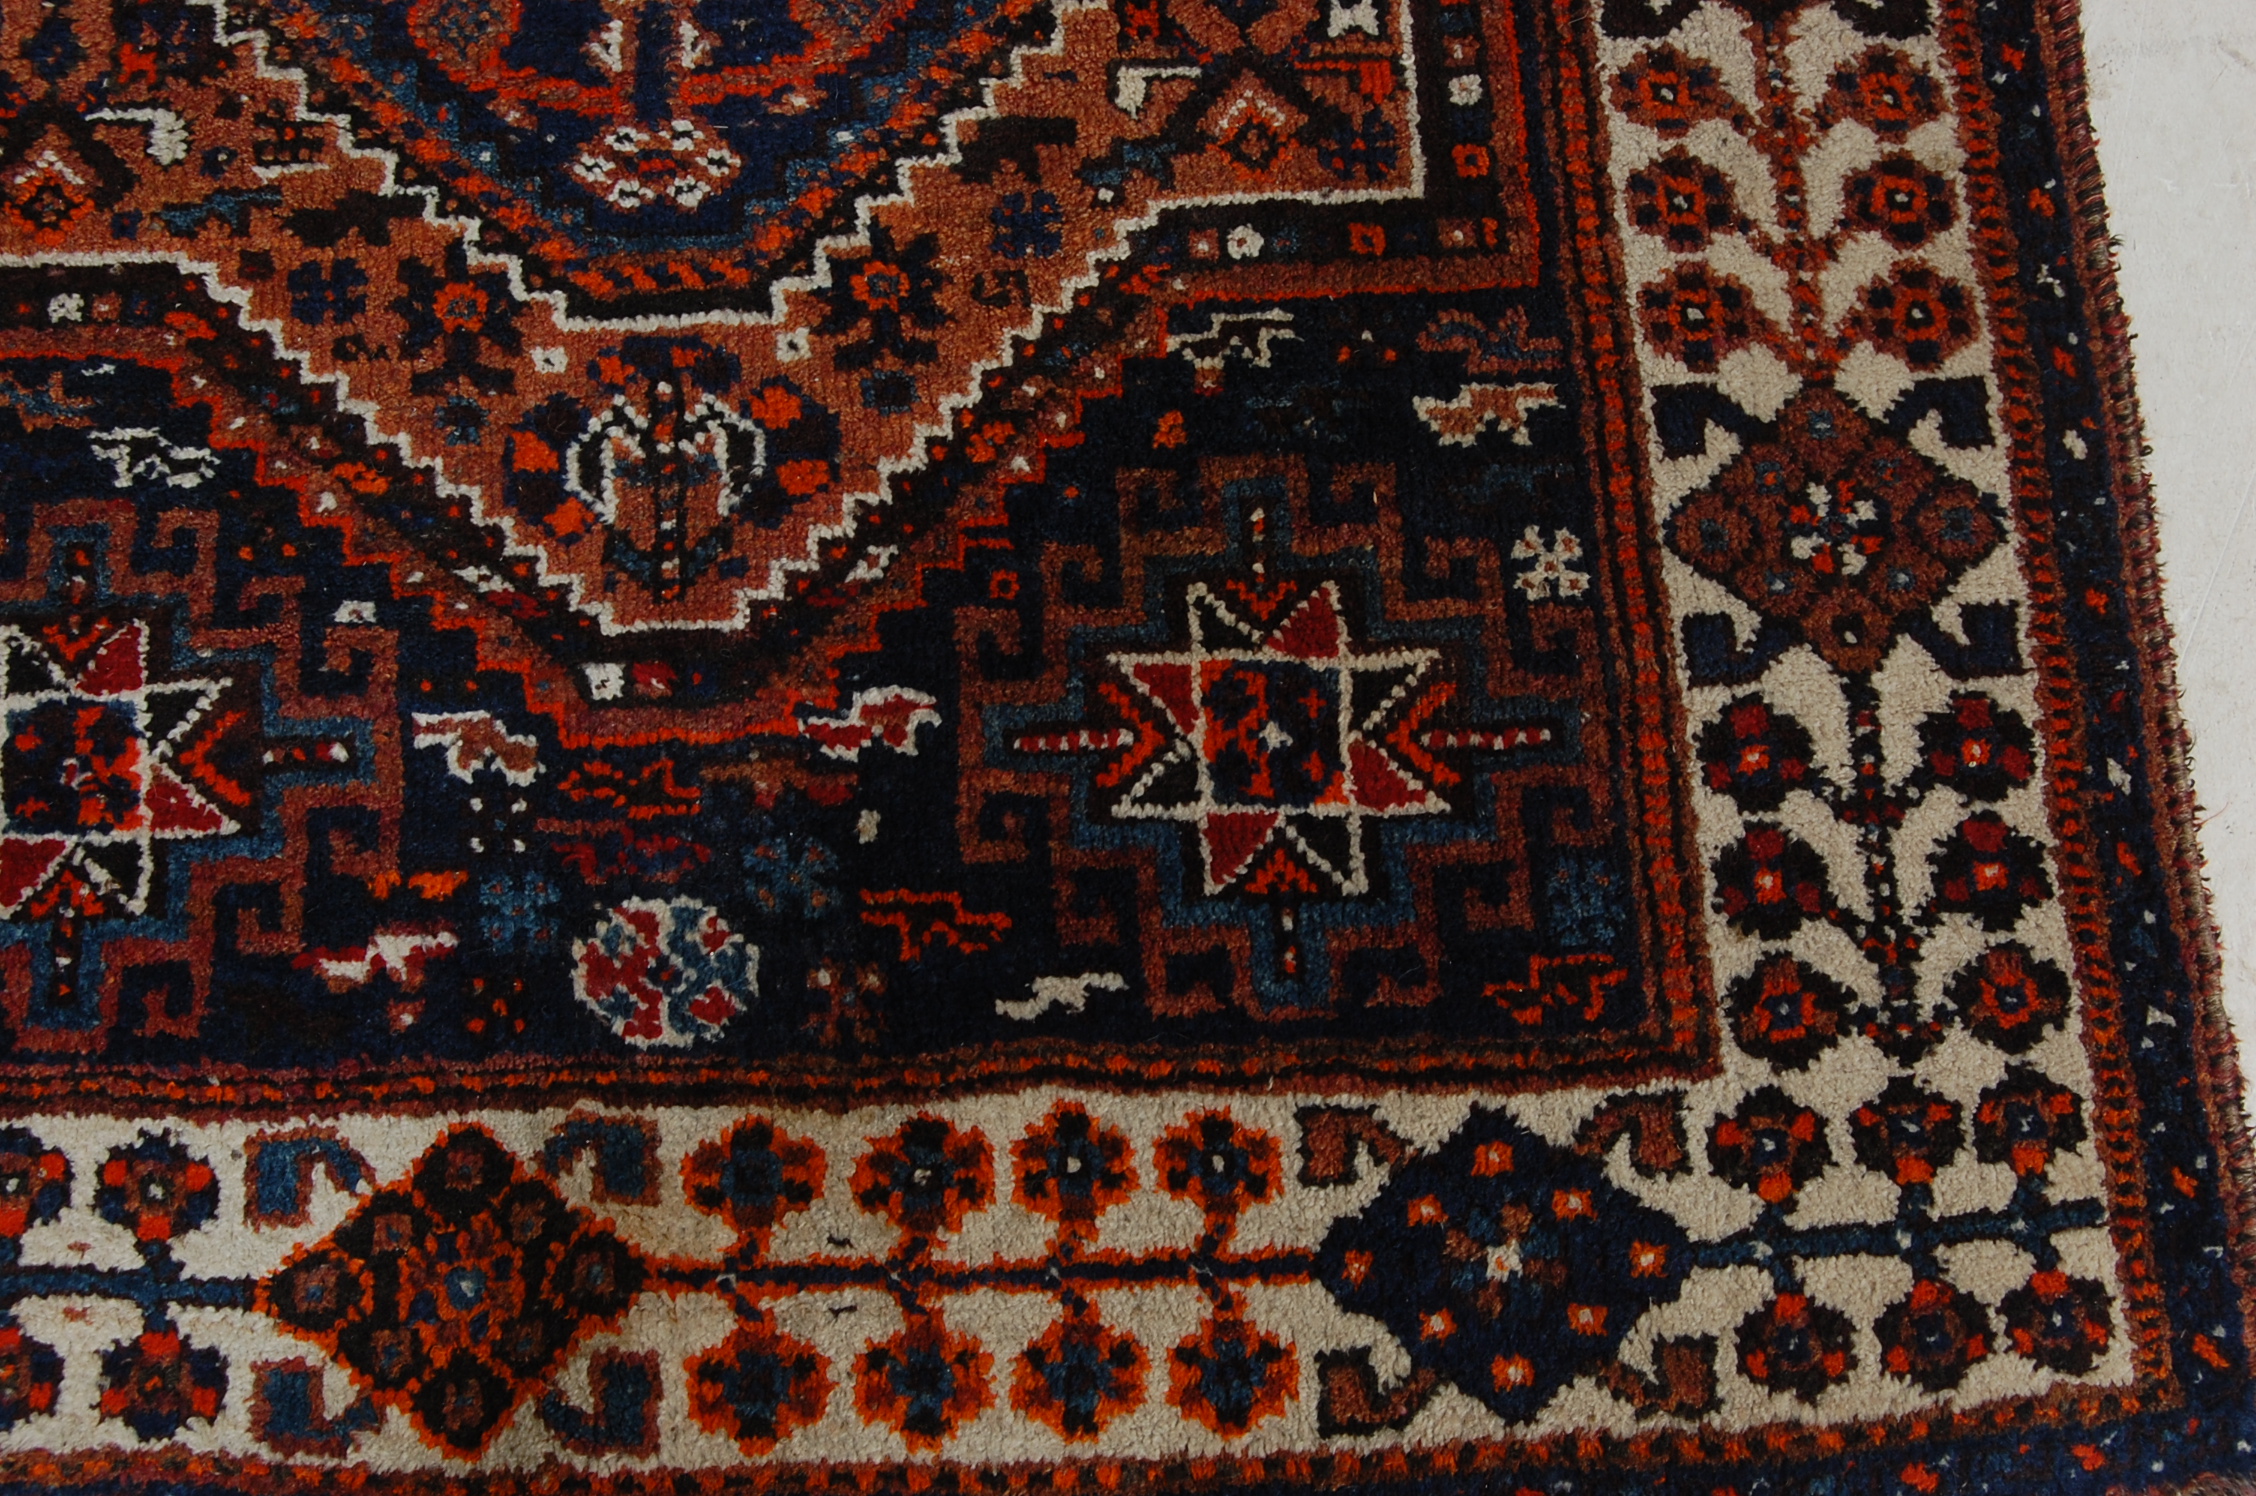 EARLY 20TH CENTURY NATURAL DYED AND HAND-WOVEN WOOL AFGHAN RUG / CARPET - Image 4 of 6